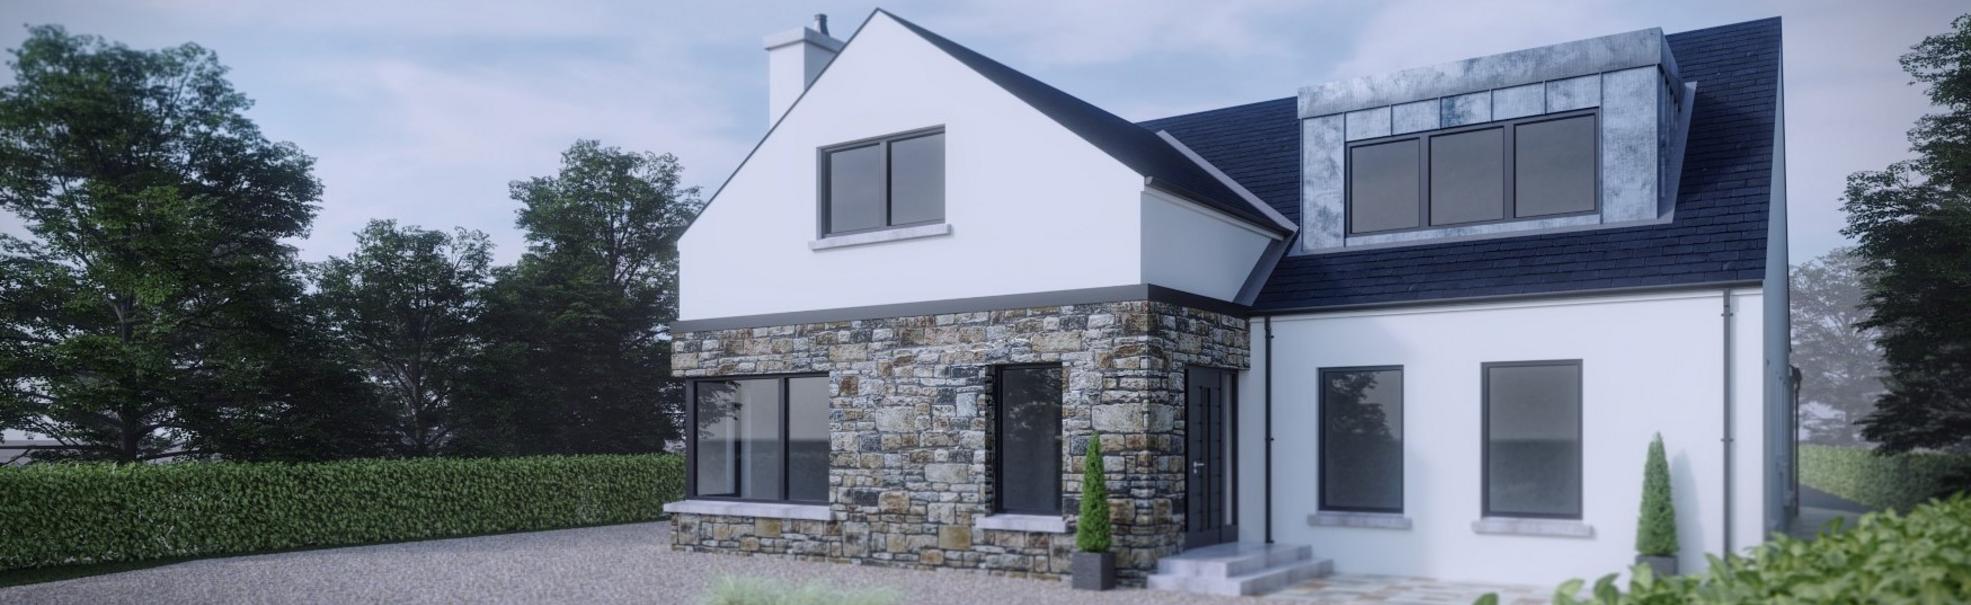 3D Visualisation of Contemporary New Dwelling, Ballymena